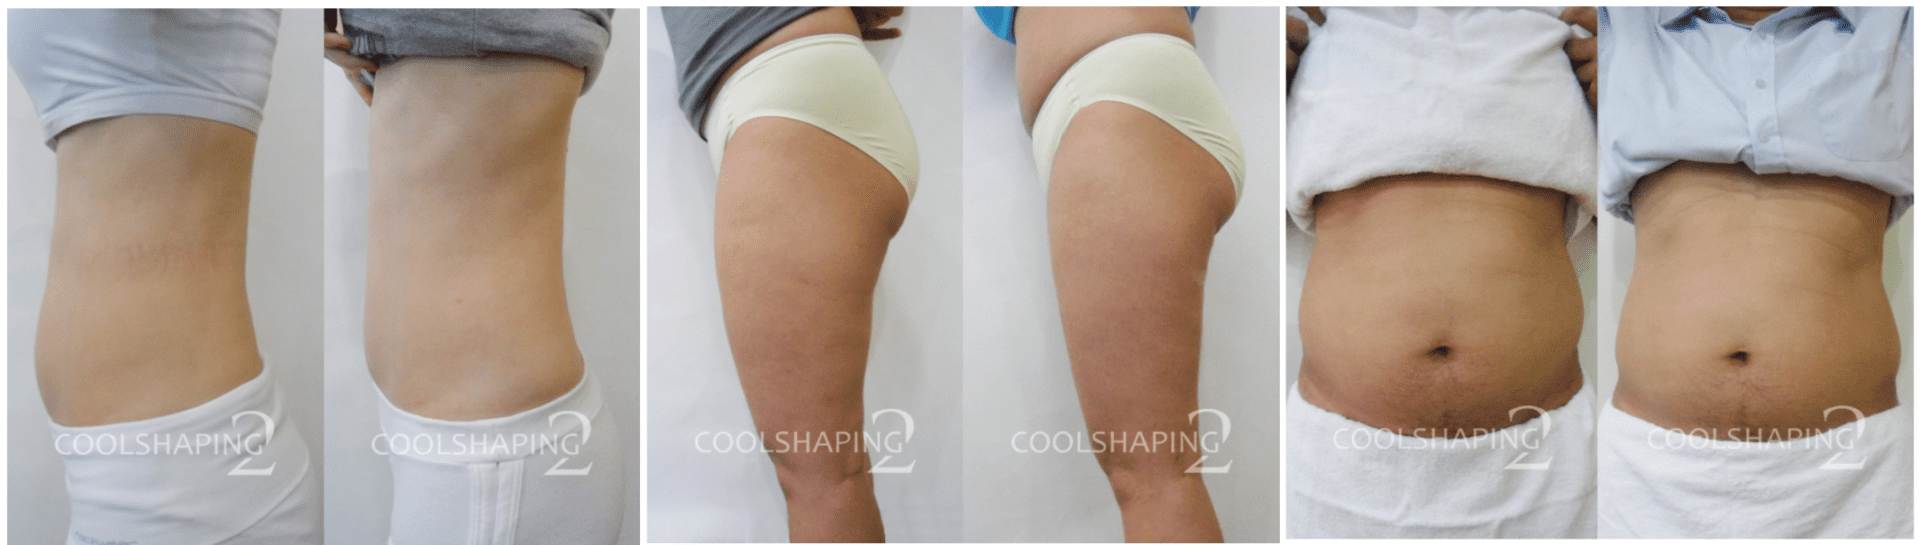 coolshaping 2 before and after pictures